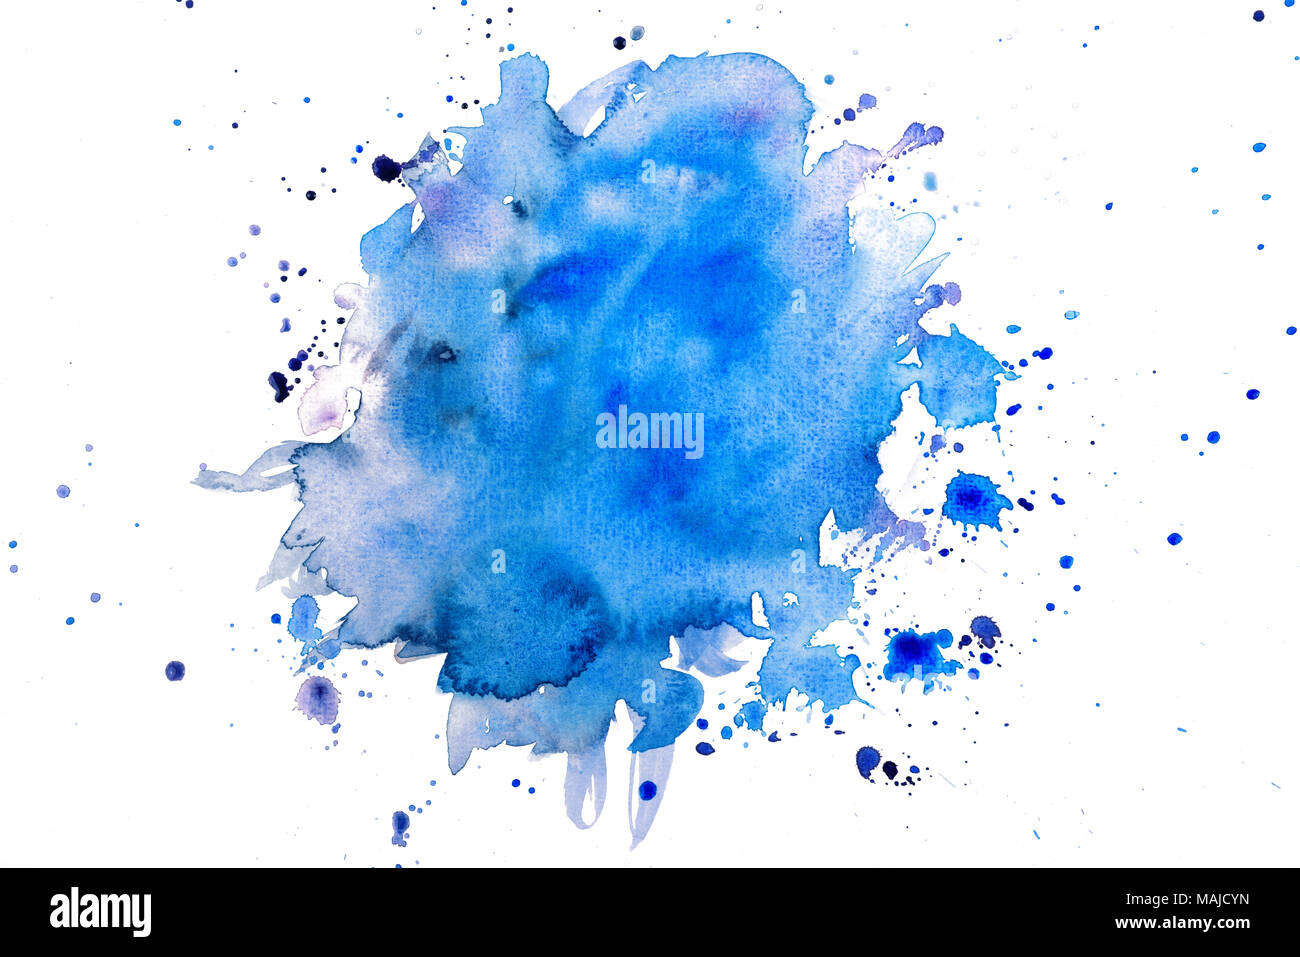 blue watercolors on paper texture , hand painted element Stock Photo